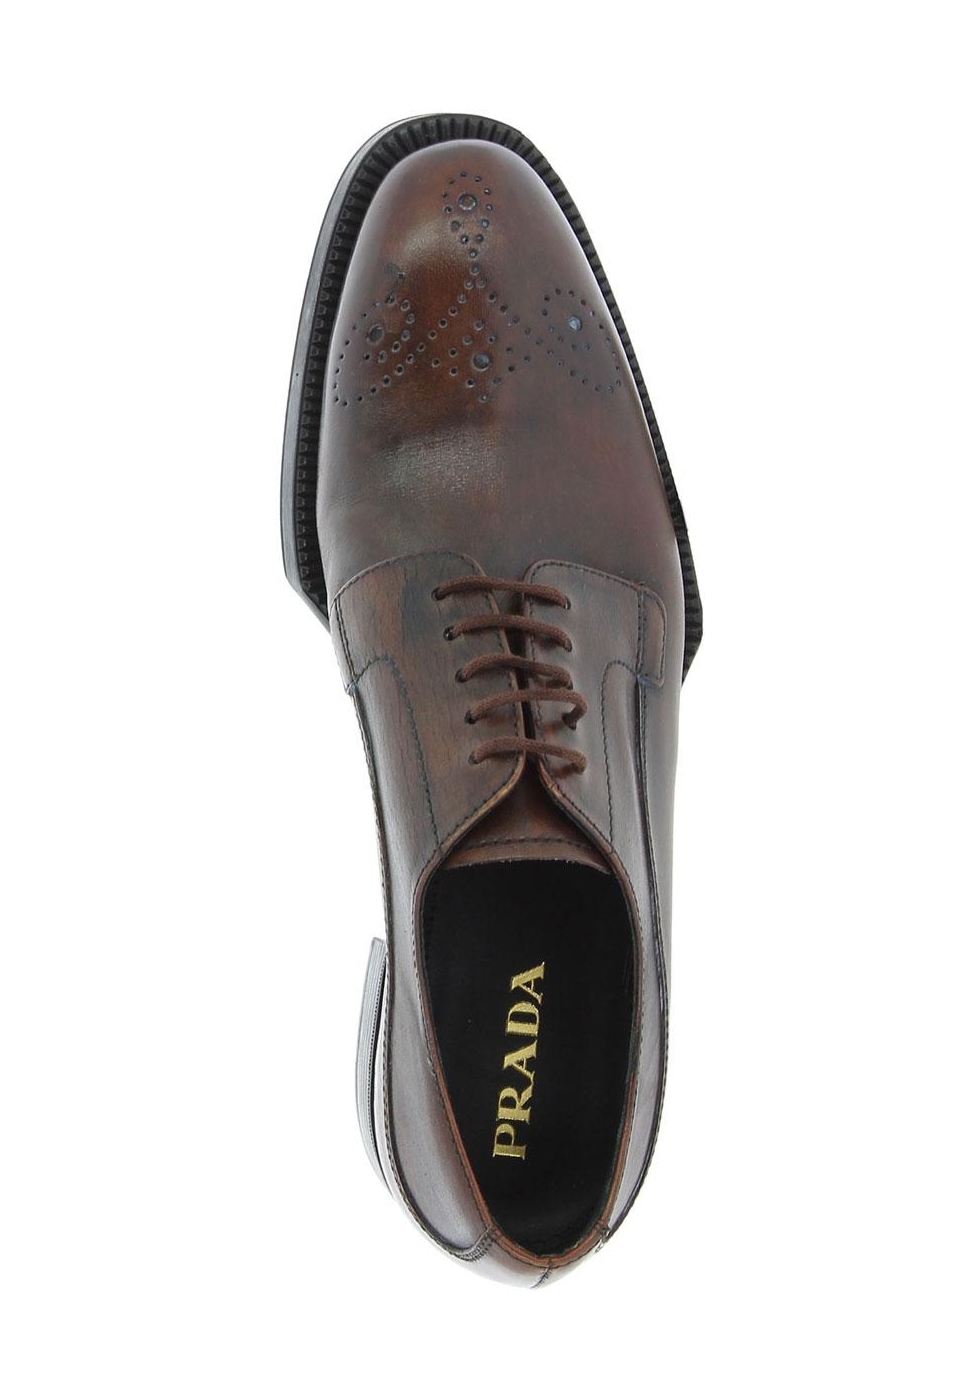 Prada Women fashion brogues Oxford laced-up shoes in dark brown calf leather - Italian Boutique